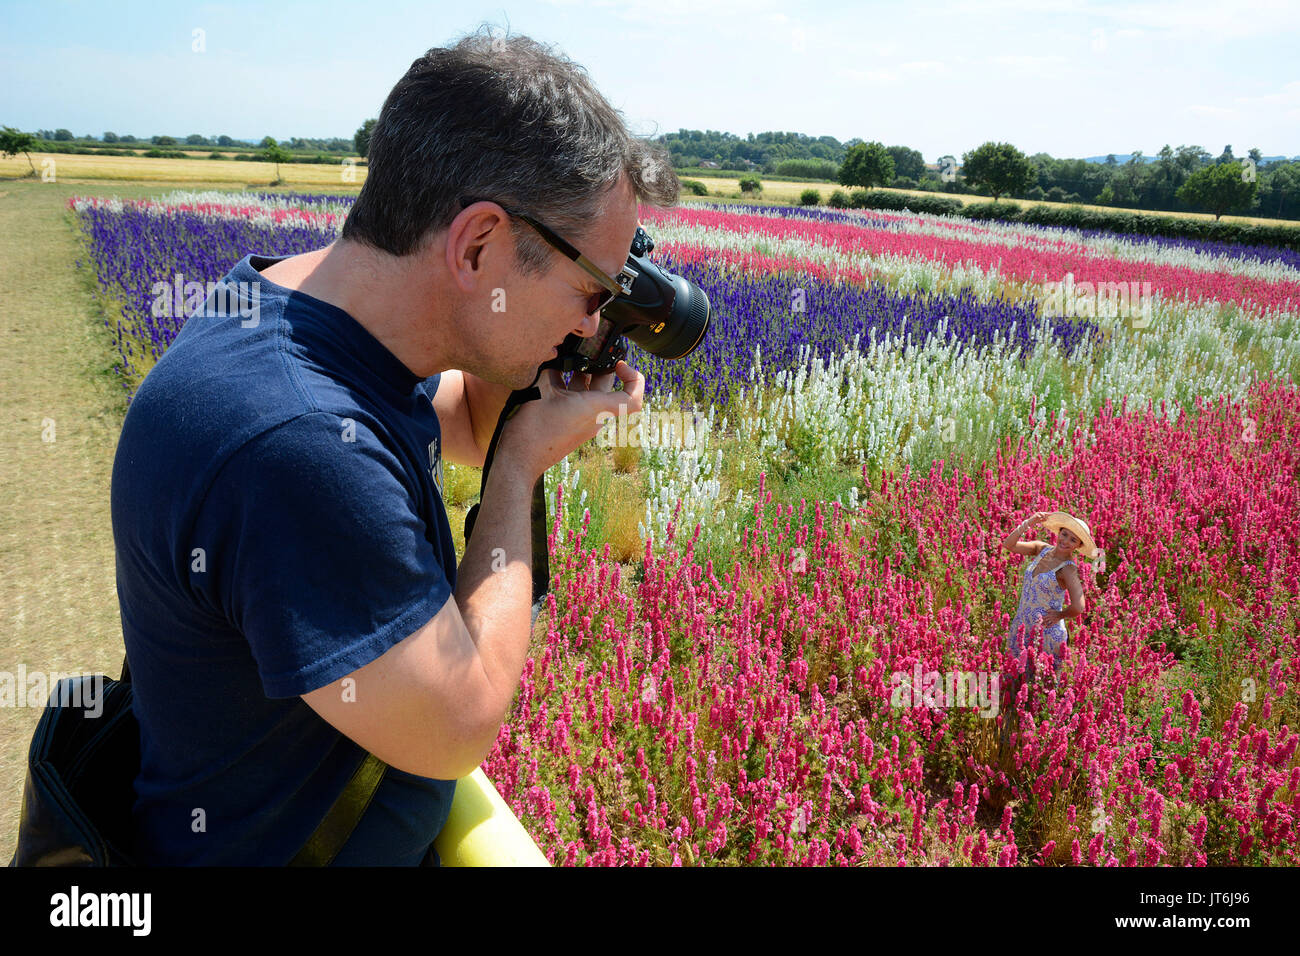 Blooming gorgeous weather- Barry Kruger photographing his wife Maria Kruger from Royal Leamington Spa amongst the delphiniums forming a Union flag at the Confetti Field in Wick, Worcestershire today- one of the world's largest carpets of flowers where today it reached 28 degrees C. The 18 acres of delphiniums are currently being picked for confetti by The Real Flower Confetti Company. Photos by John Robertson, 6th July 2017. Stock Photo